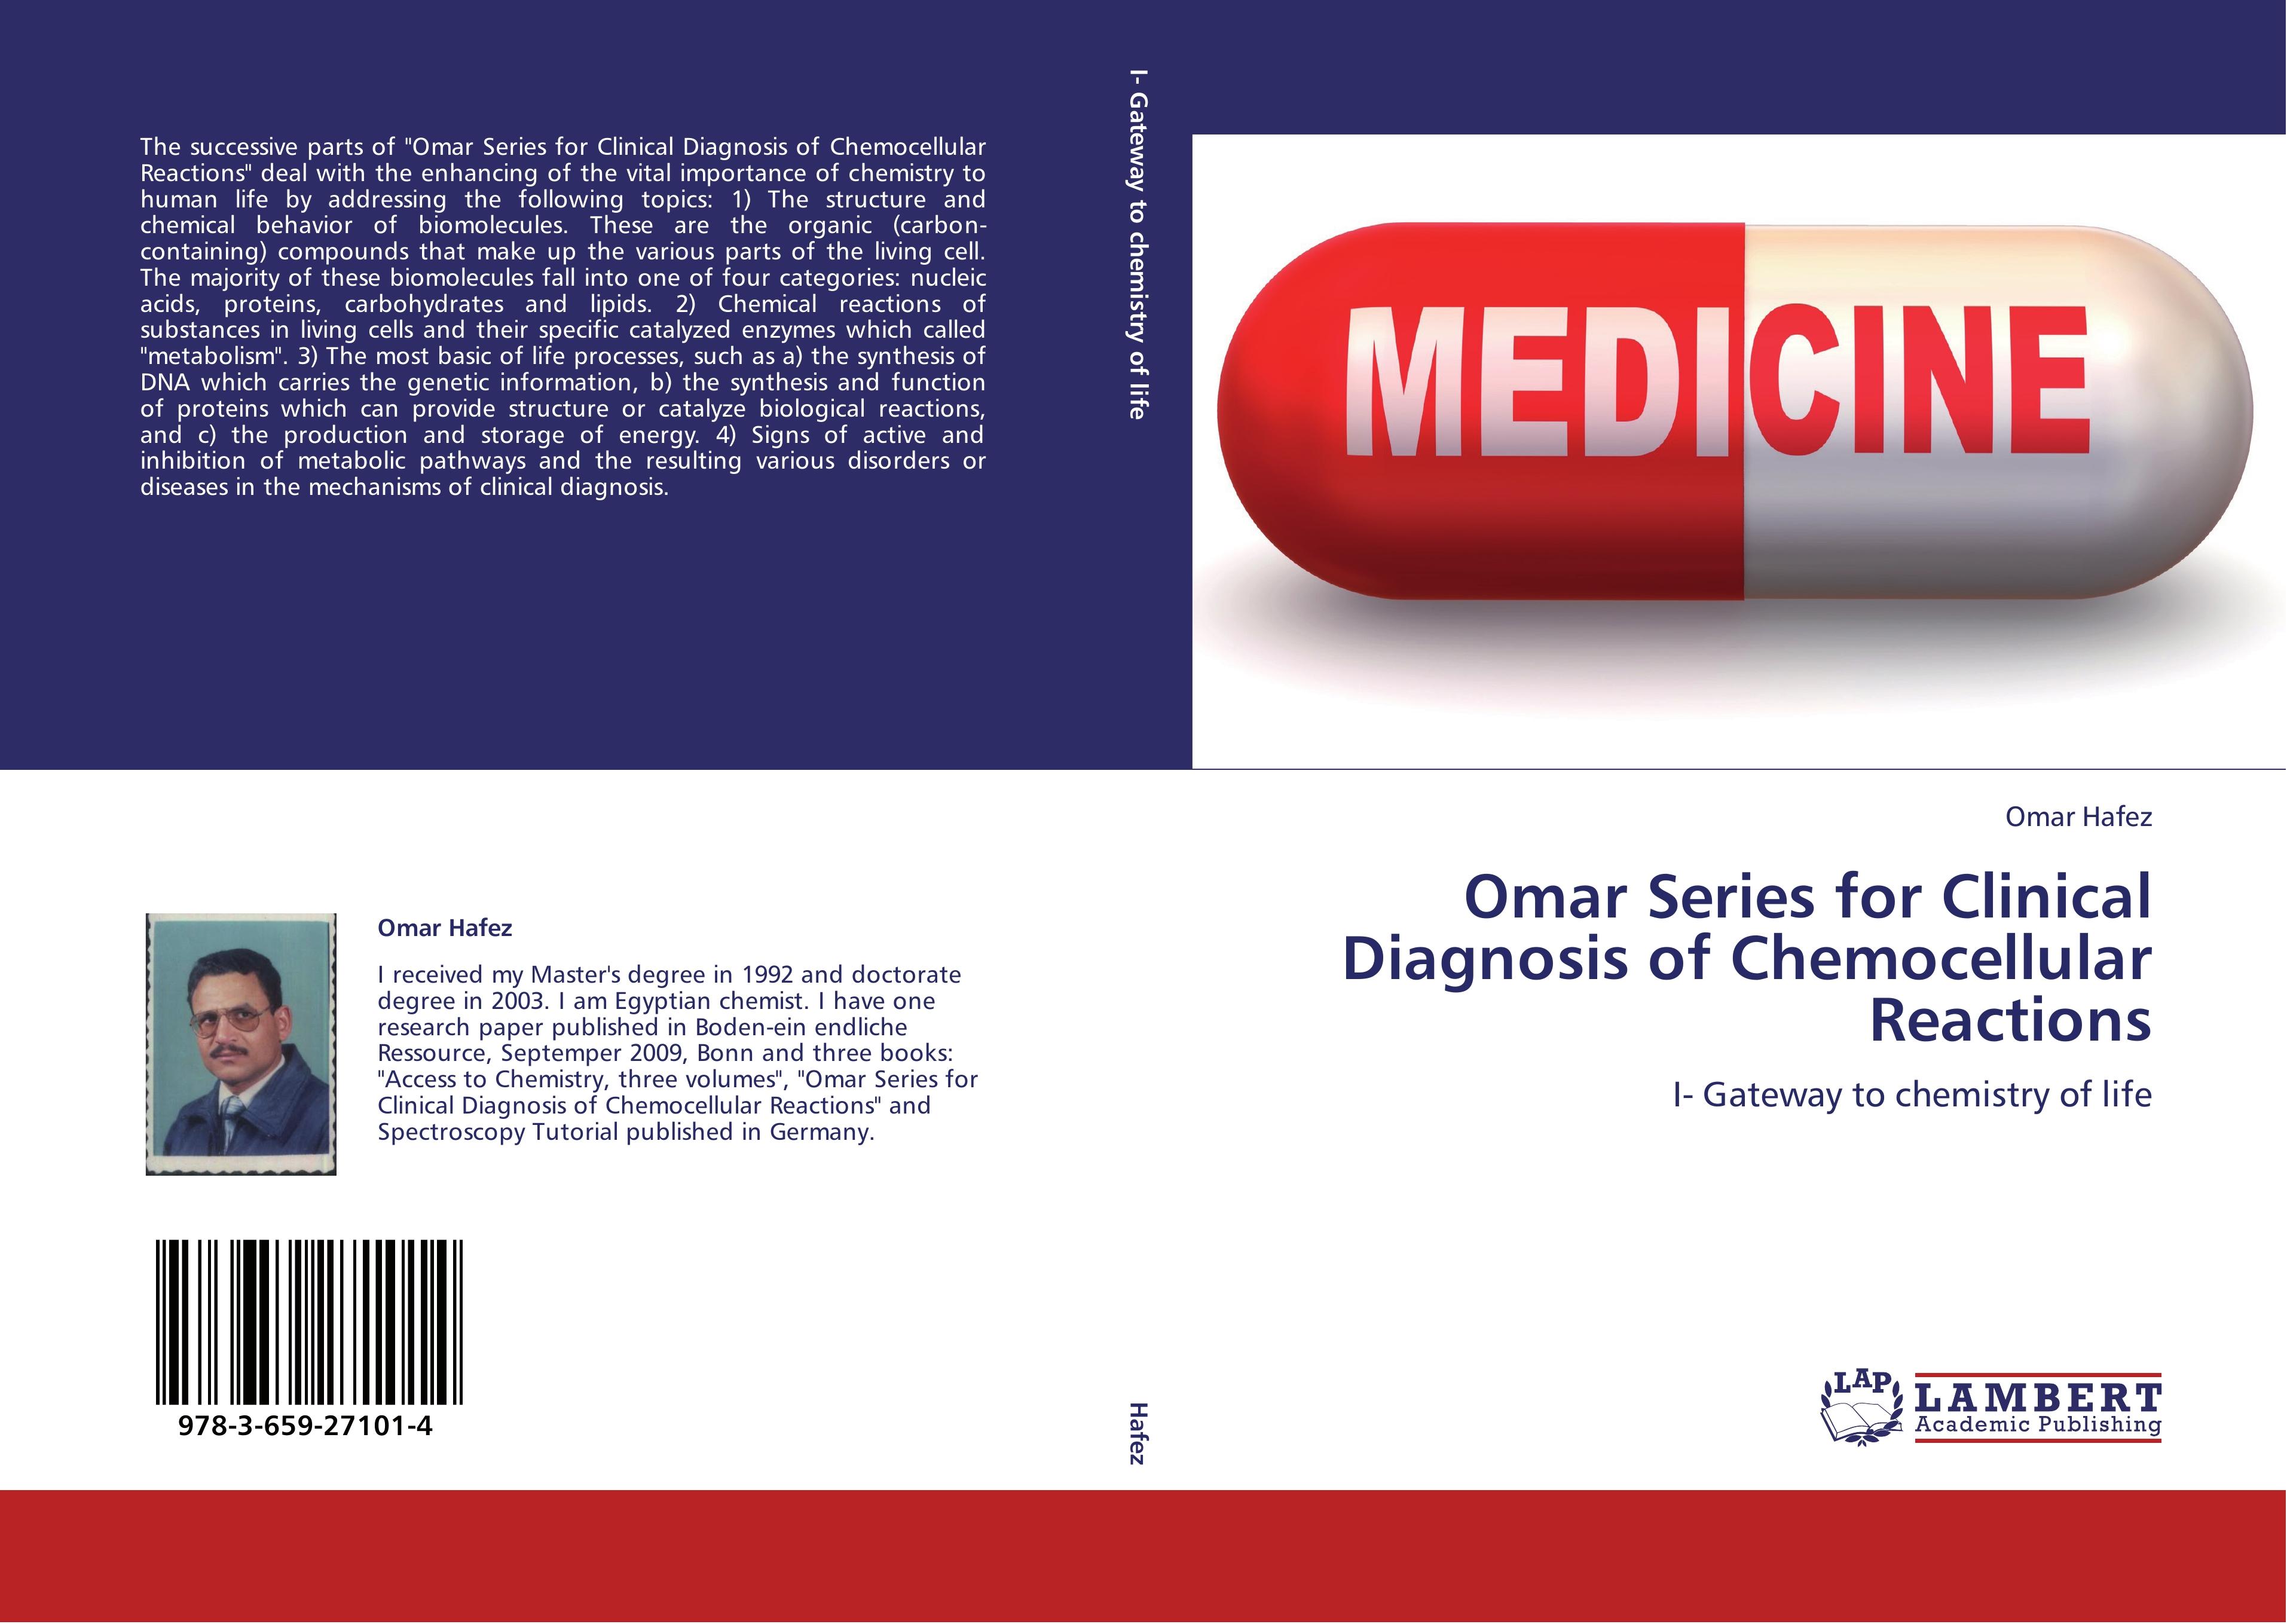 Omar Series for Clinical Diagnosis of Chemocellular Reactions / I- Gateway to chemistry of life / Omar Hafez / Taschenbuch / Paperback / 228 S. / Englisch / 2012 / LAP LAMBERT Academic Publishing - Hafez, Omar